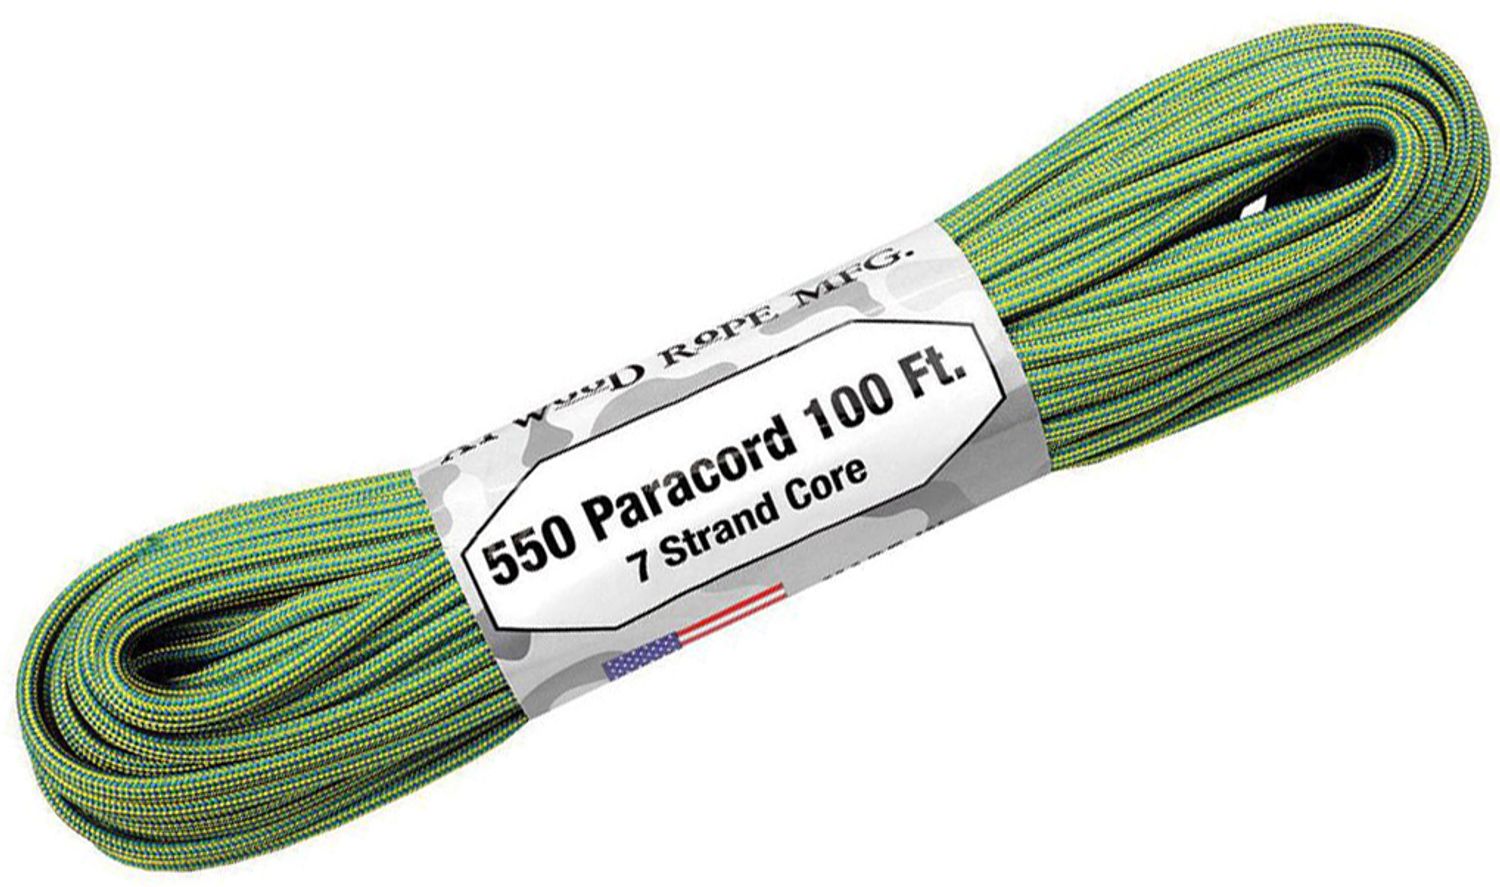 Atwood Rope Color Changing 550 Paracord, Tree Frog, 100 Feet - KnifeCenter  - RG1301H